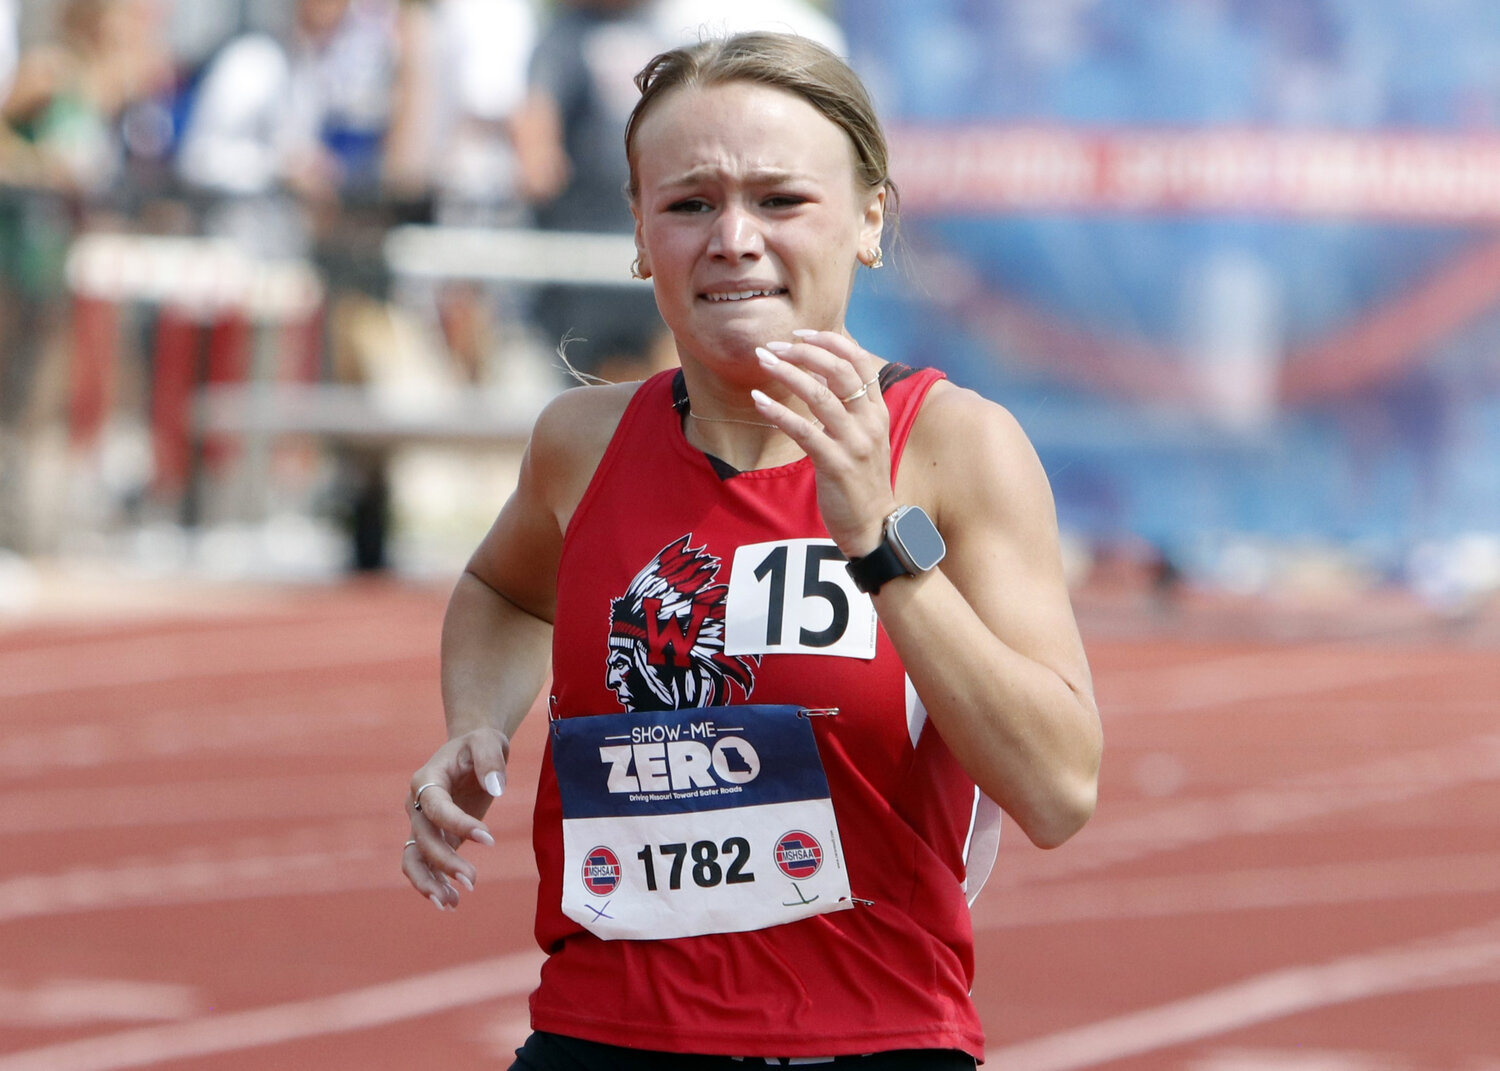 Madelyn Marschel competes in the Class 4 800-meter run during the state track and field meet.